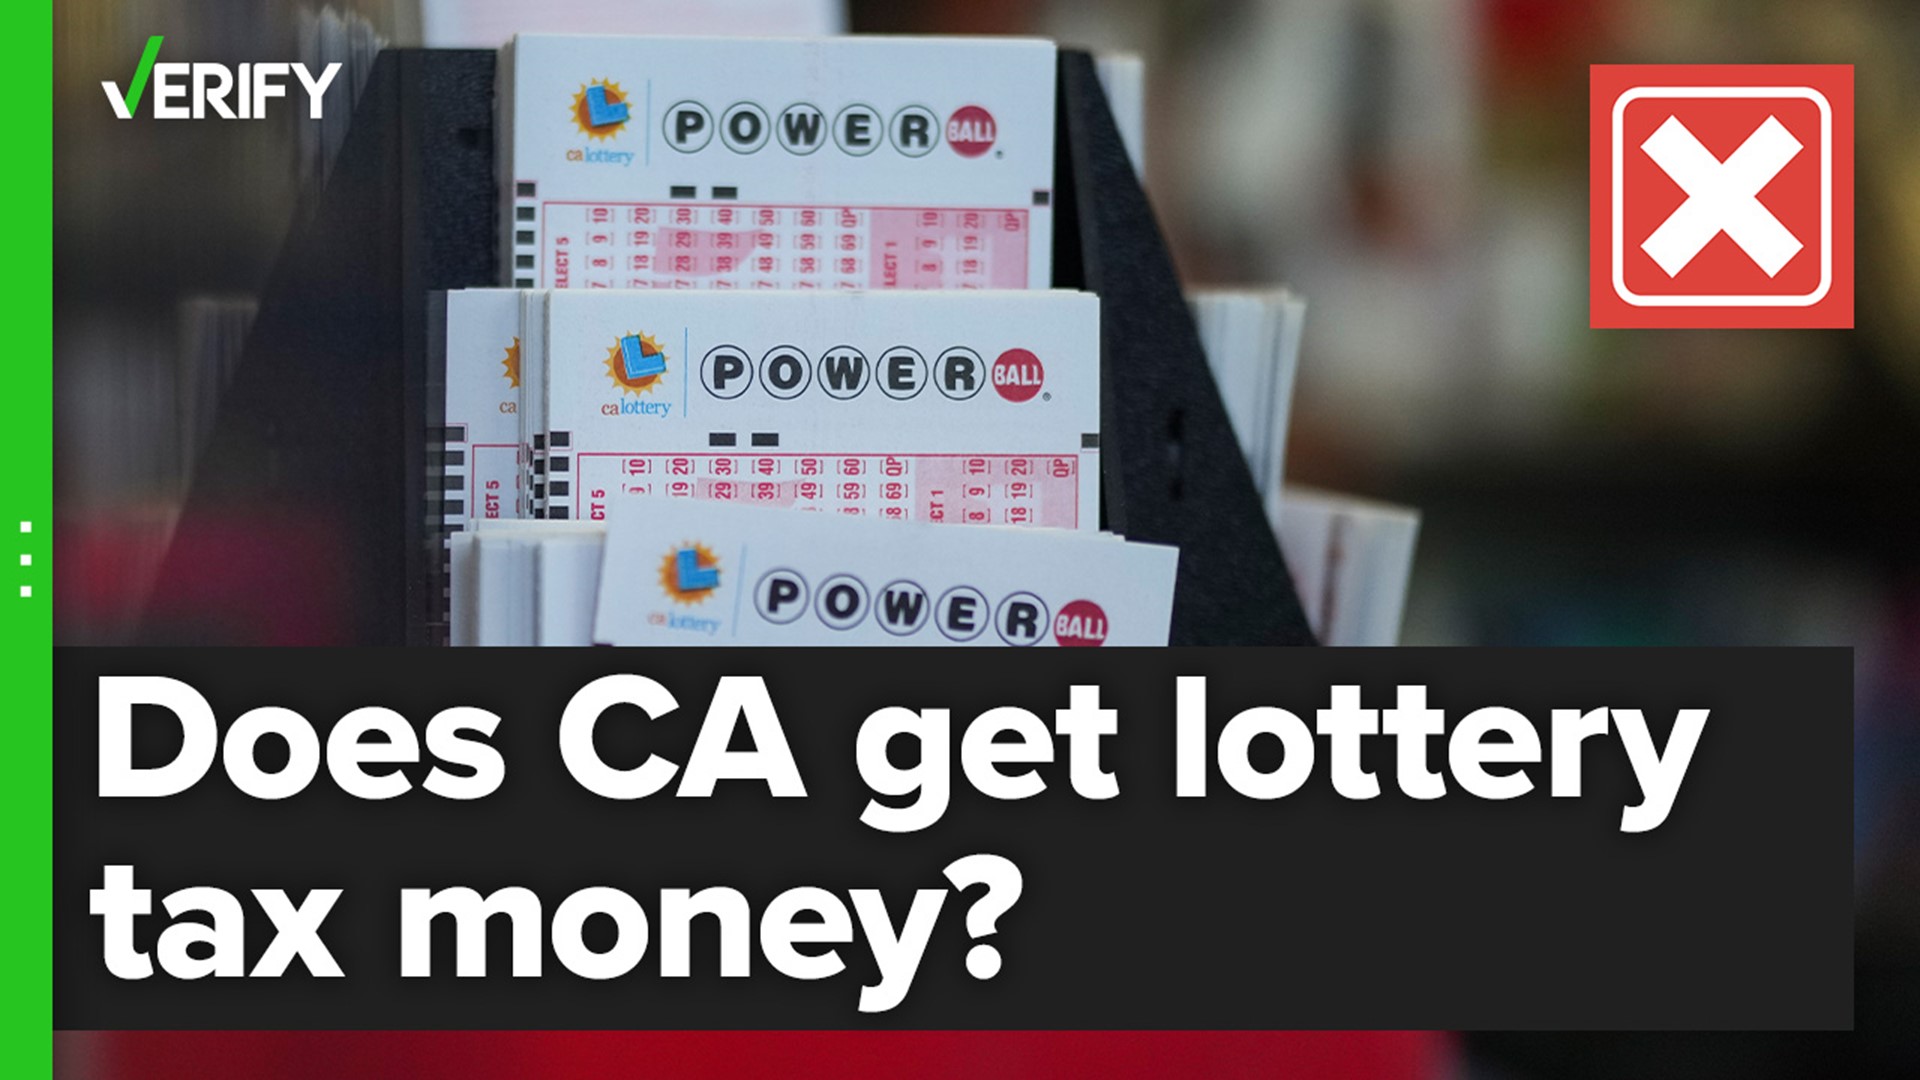 While the federal government almost always collects taxes from the Powerball jackpot, only some states tax them.